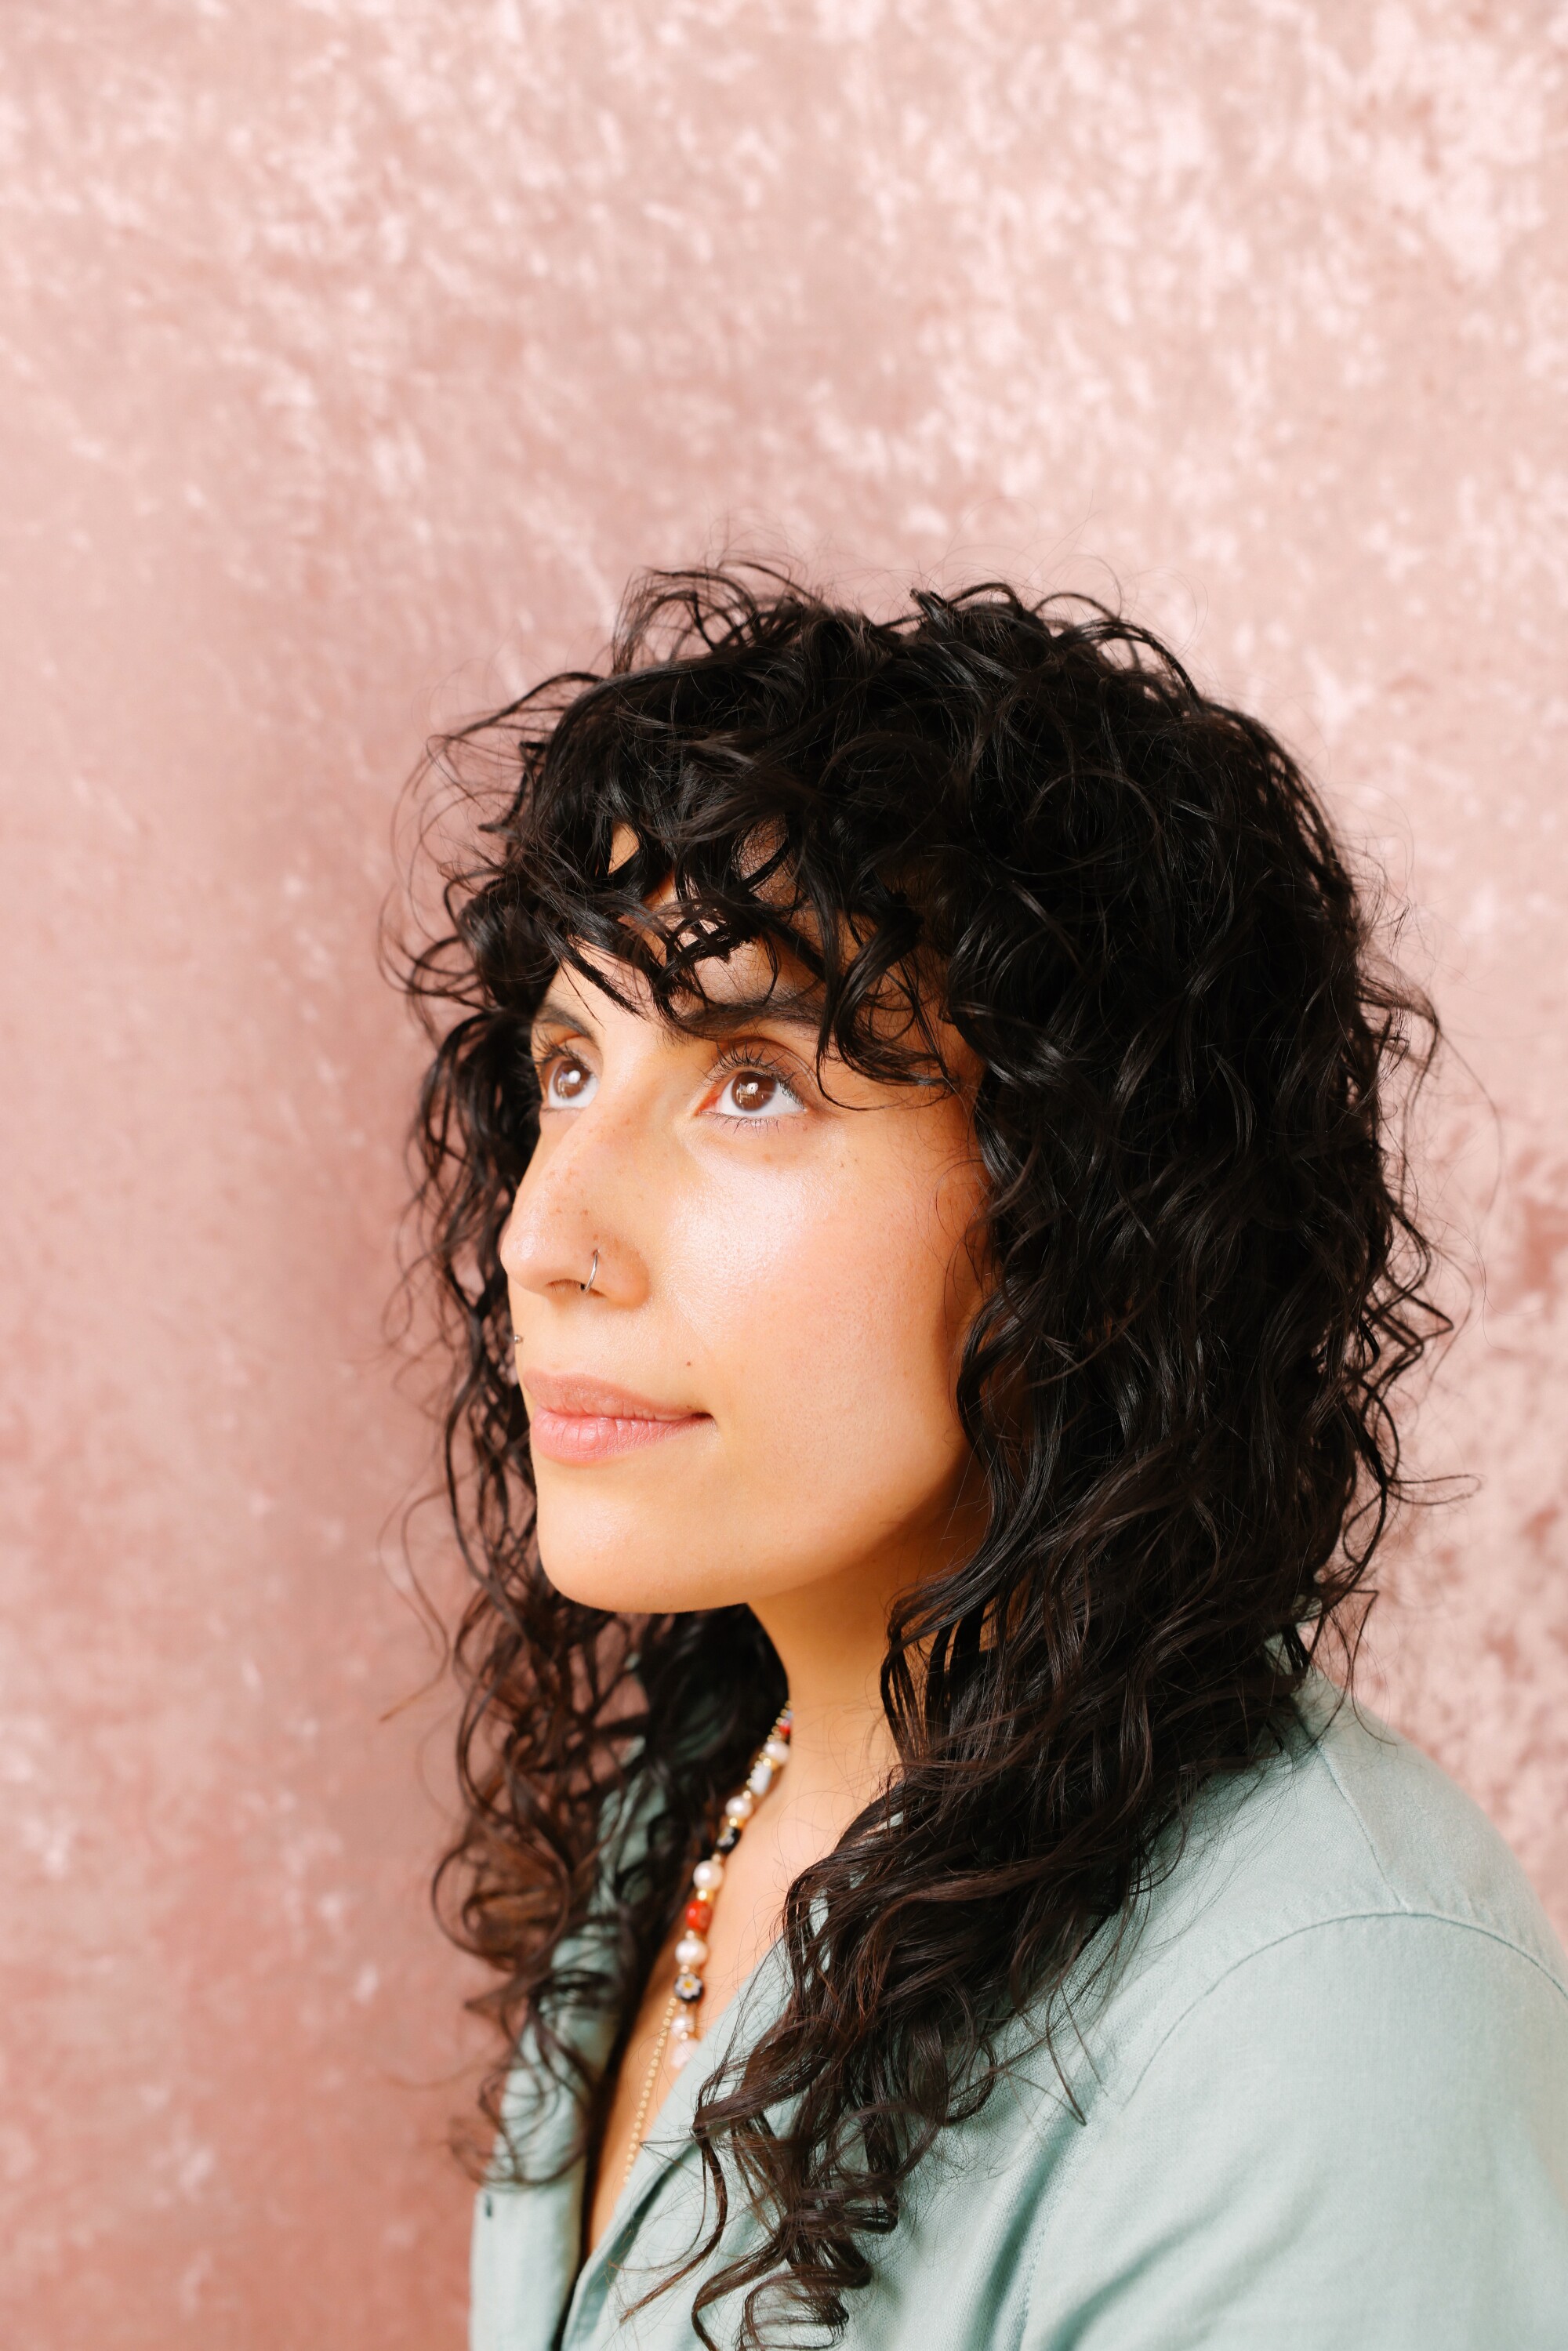 A person with curly long hair looks up for a portrait against a pink background